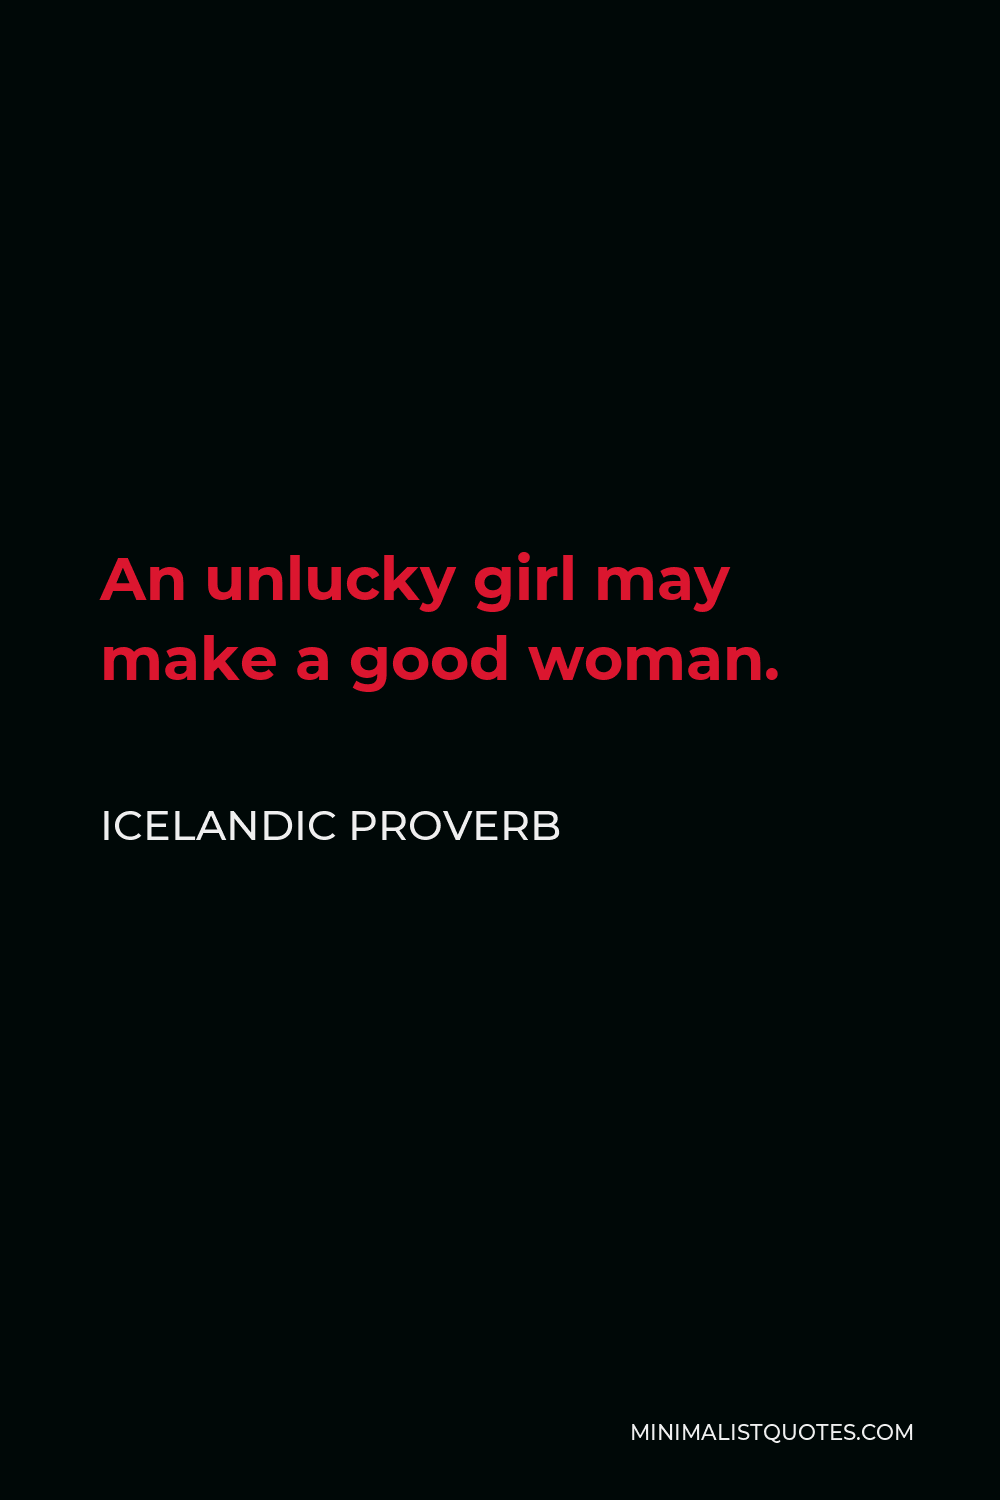 Icelandic Proverb Quote - An unlucky girl may make a good woman.